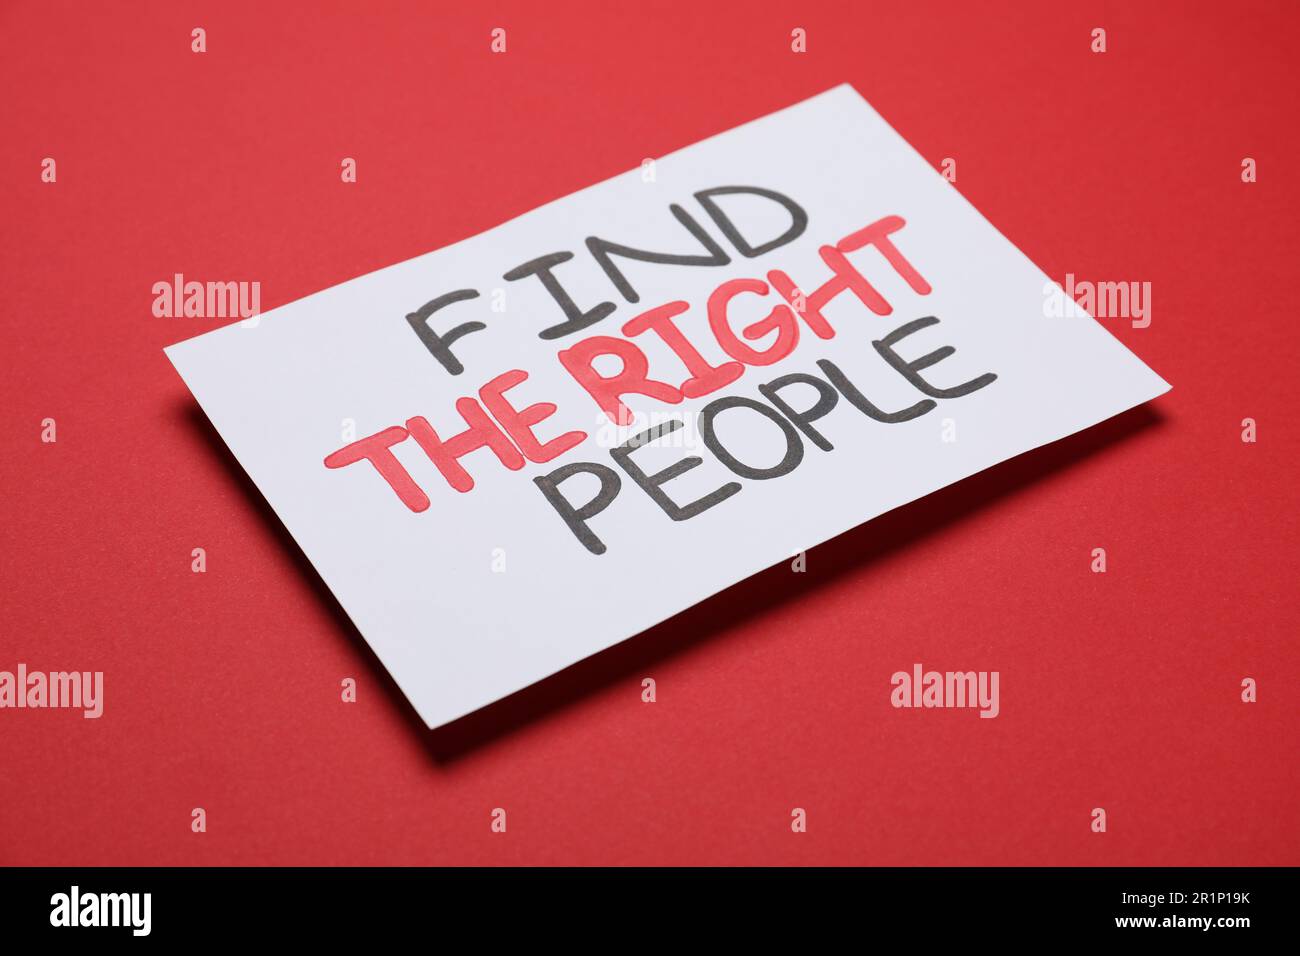 Card with motivational phrase Find The Right People on red background Stock Photo